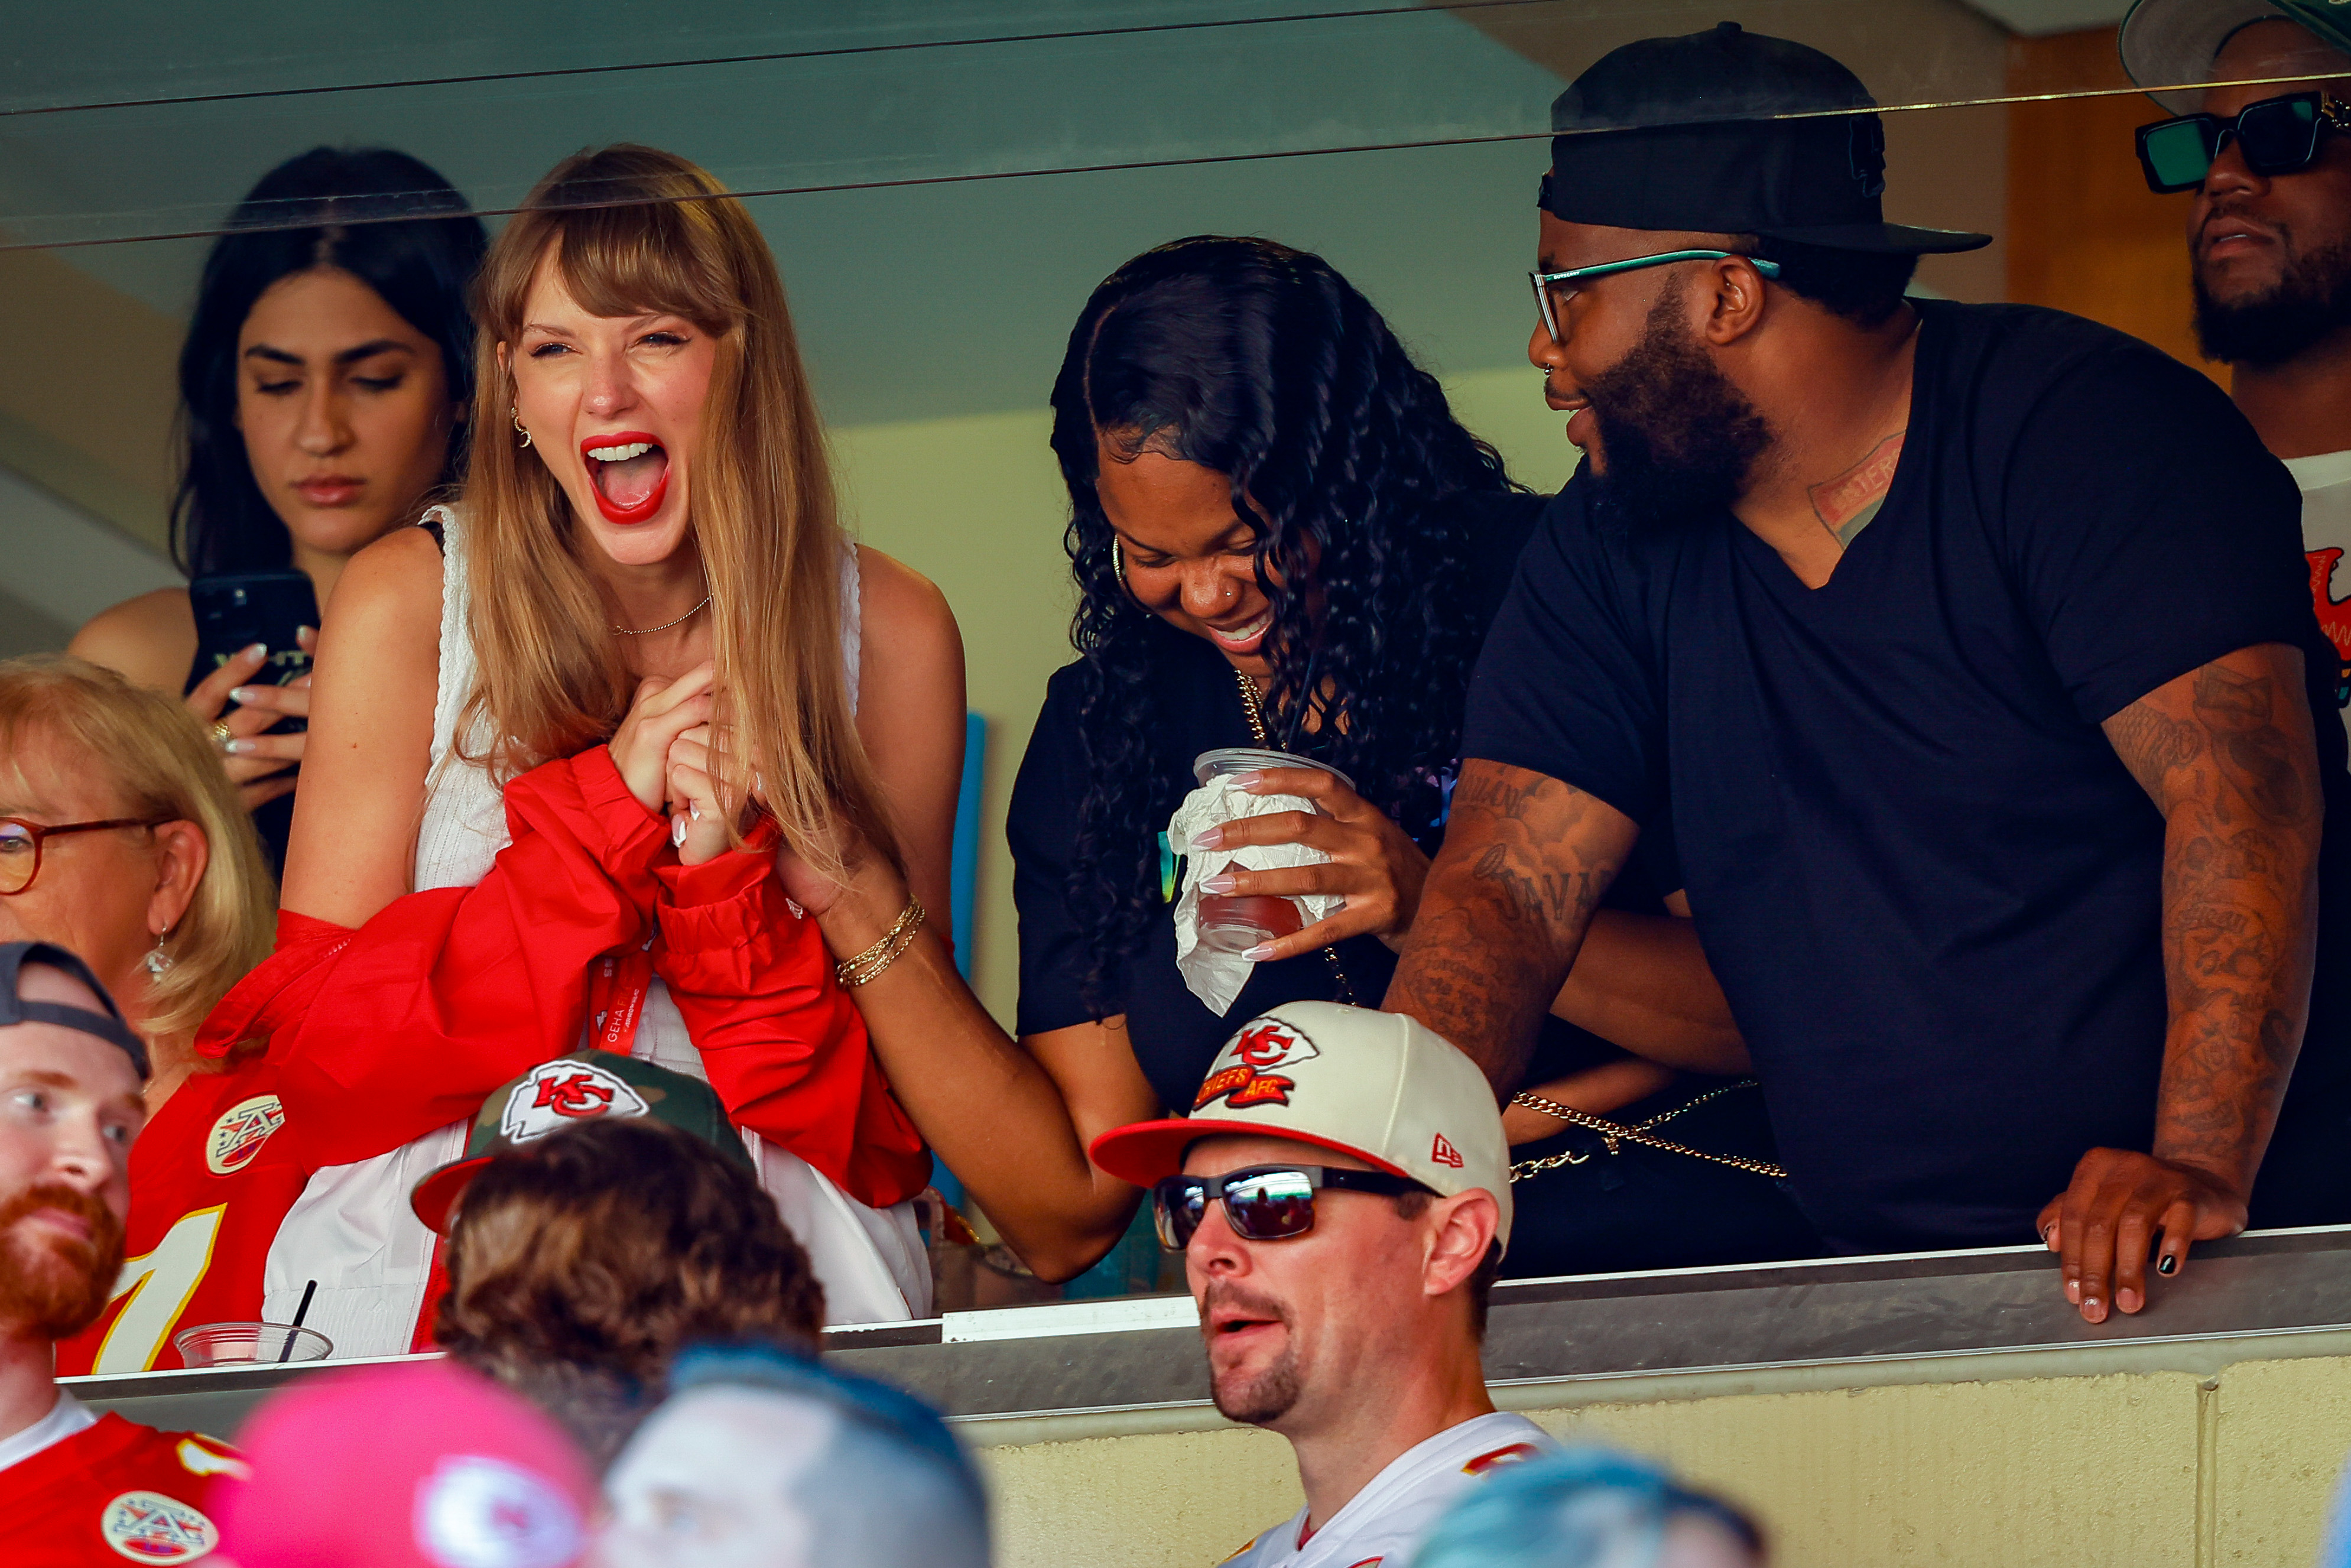 taylor cheering during the game